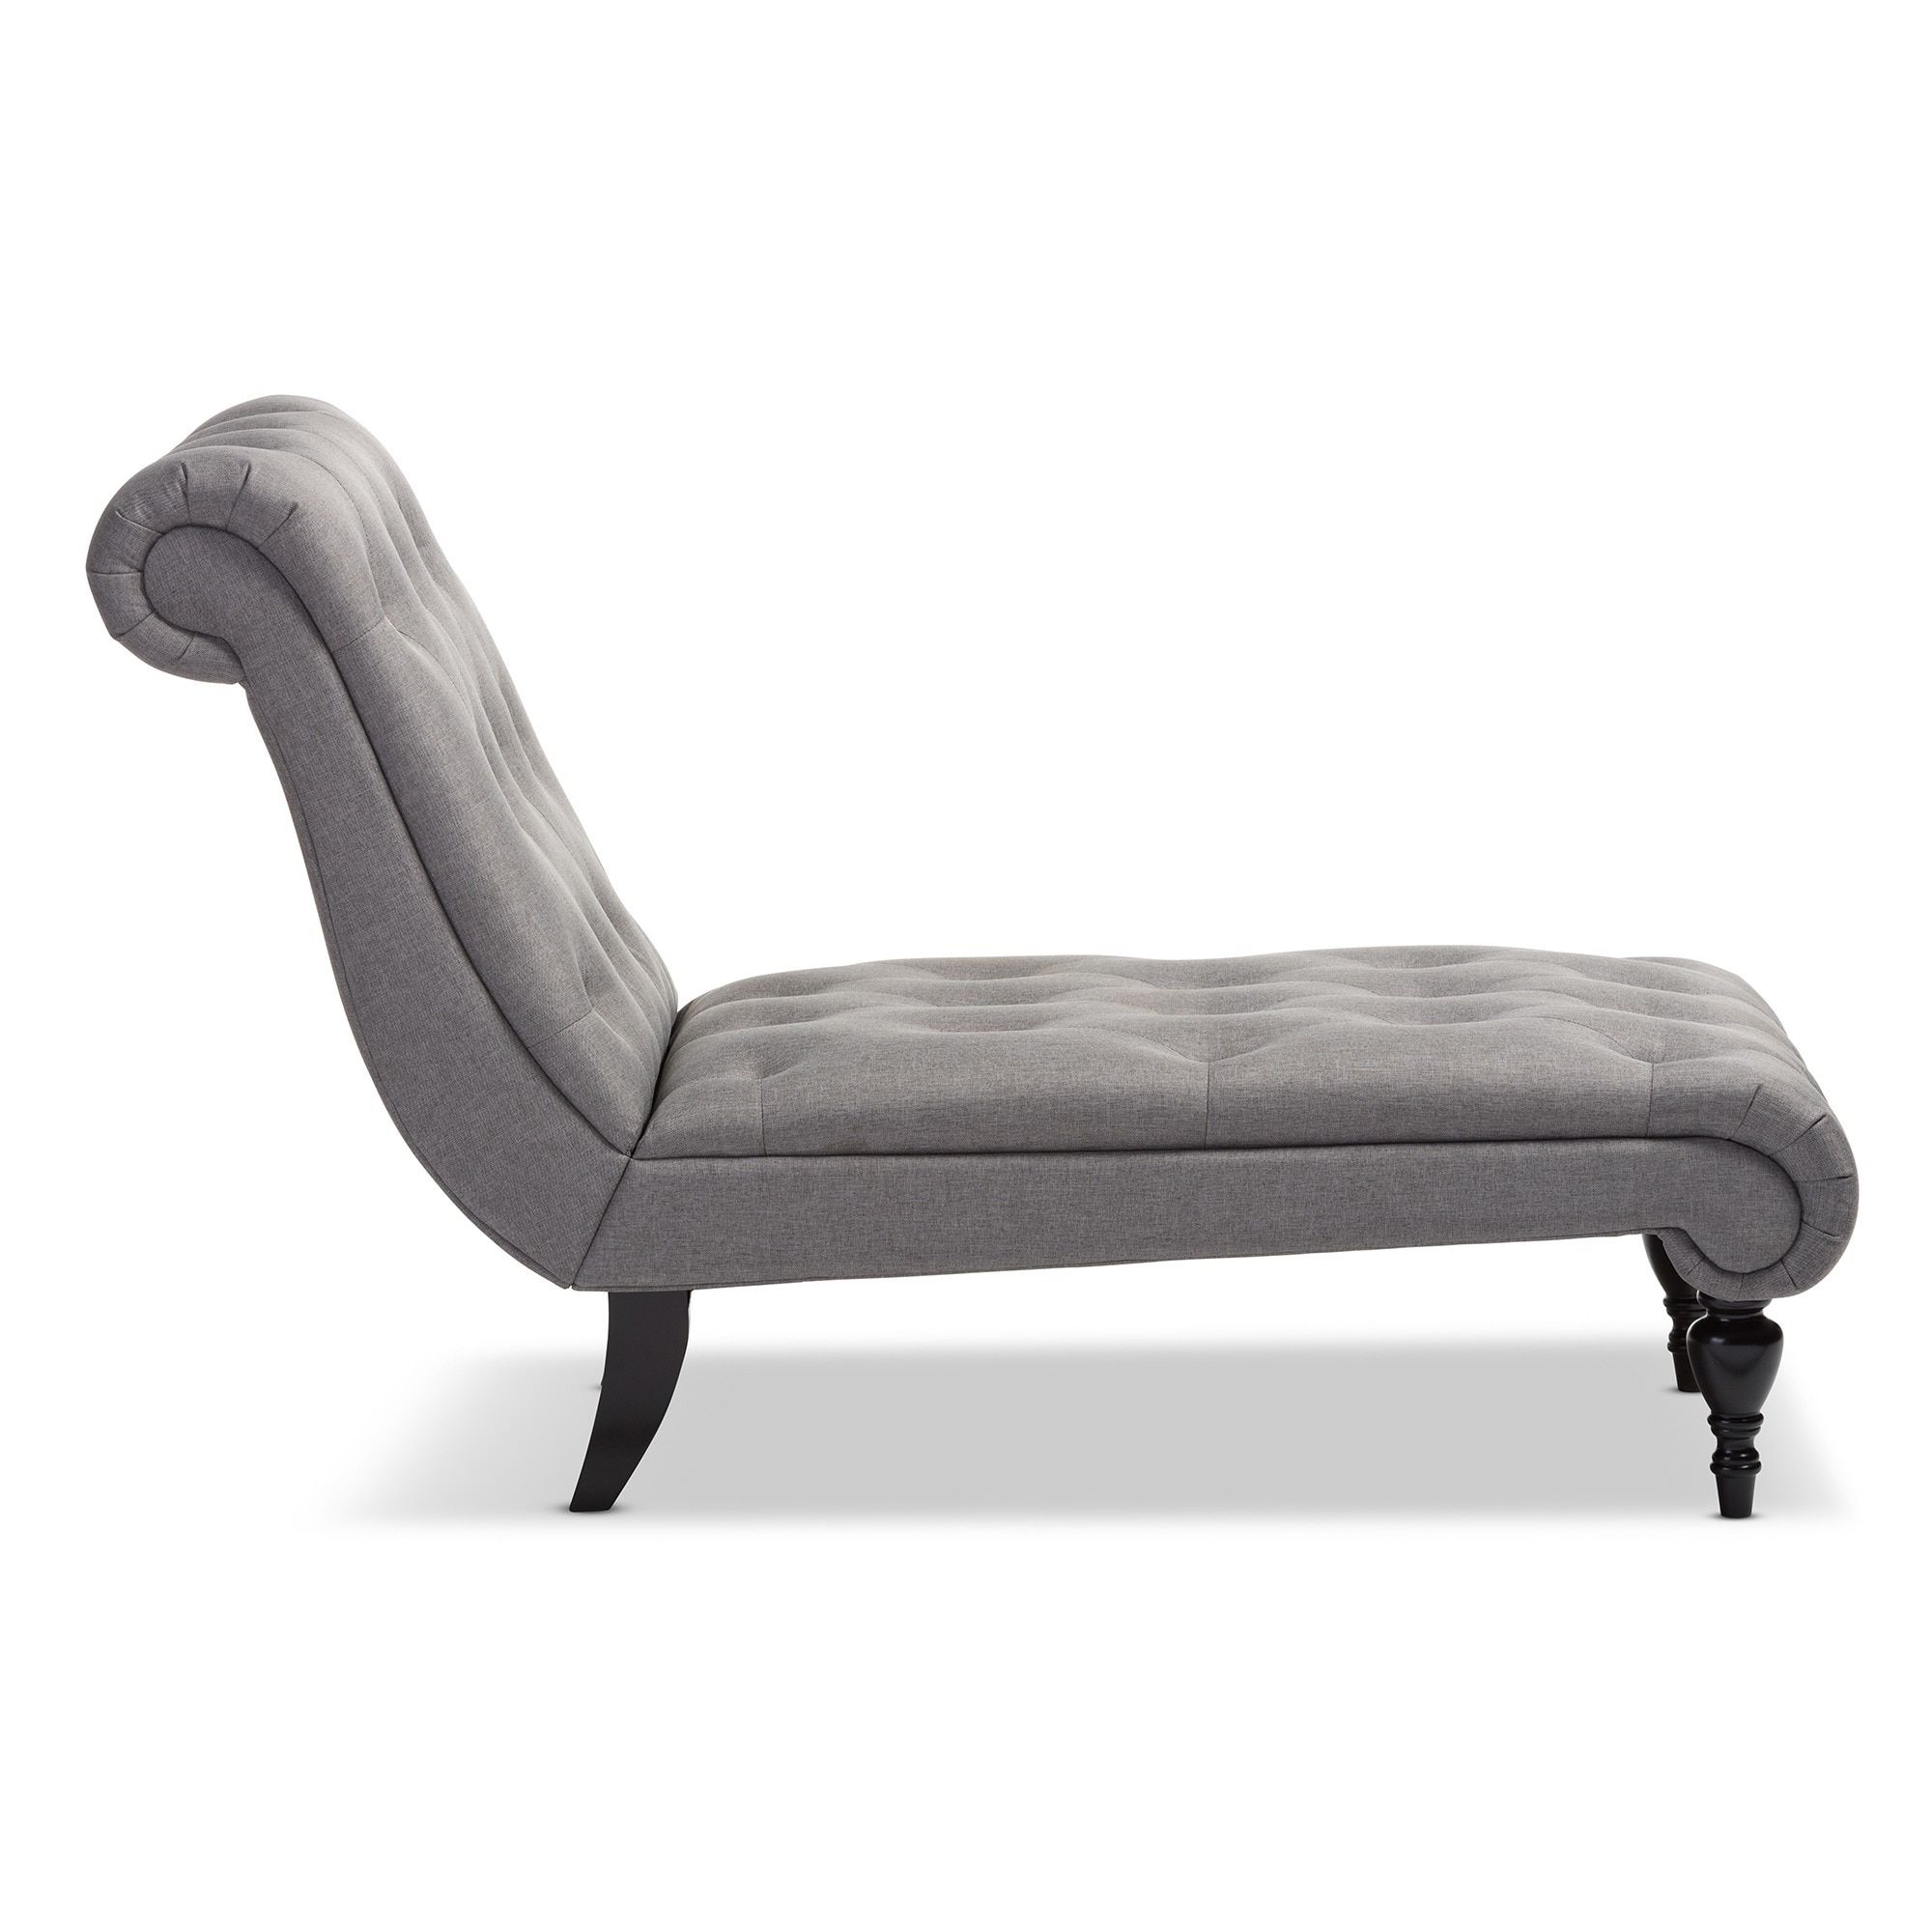 Gray Chaise Lounges Intended For Best And Newest Baxton Studio Layla Mid Century Retro Modern Grey Fabric (View 12 of 15)